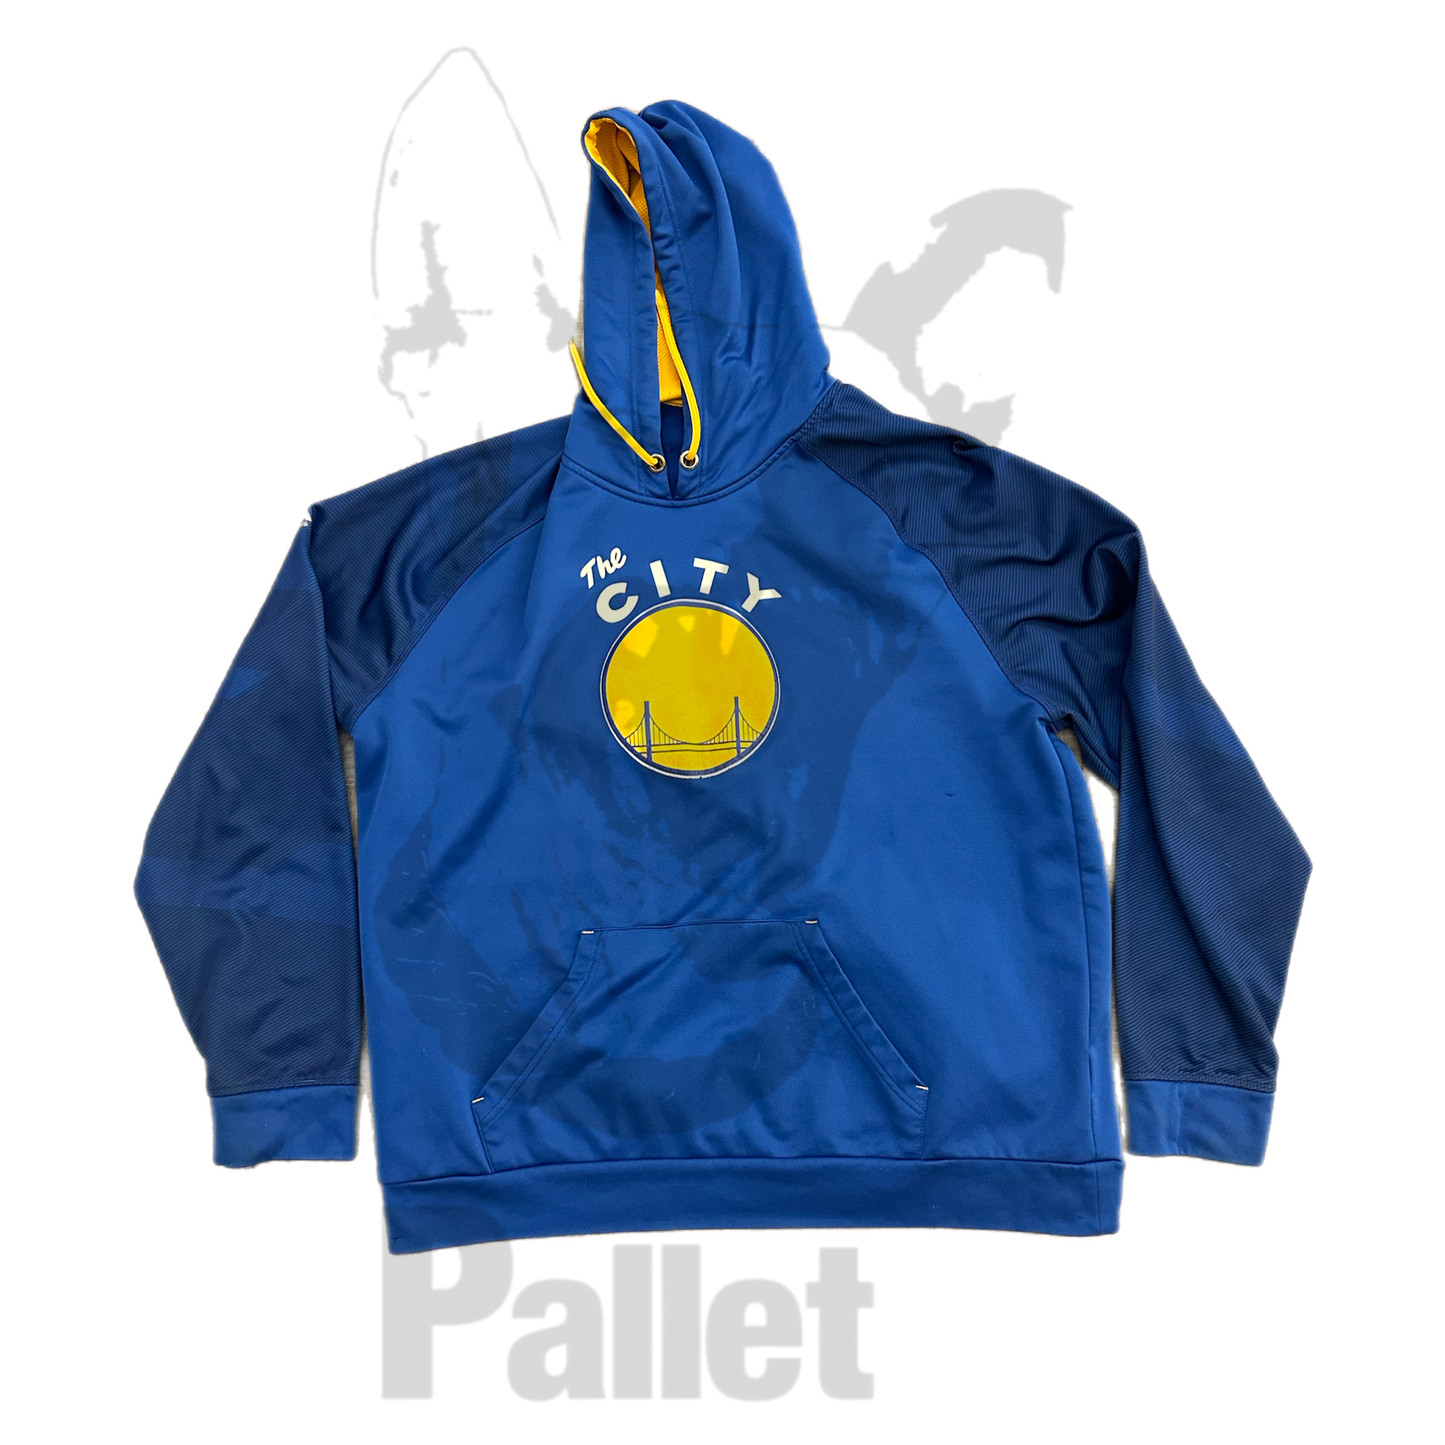 Vintage - "Golden State The City Hoodie" - Size XXL